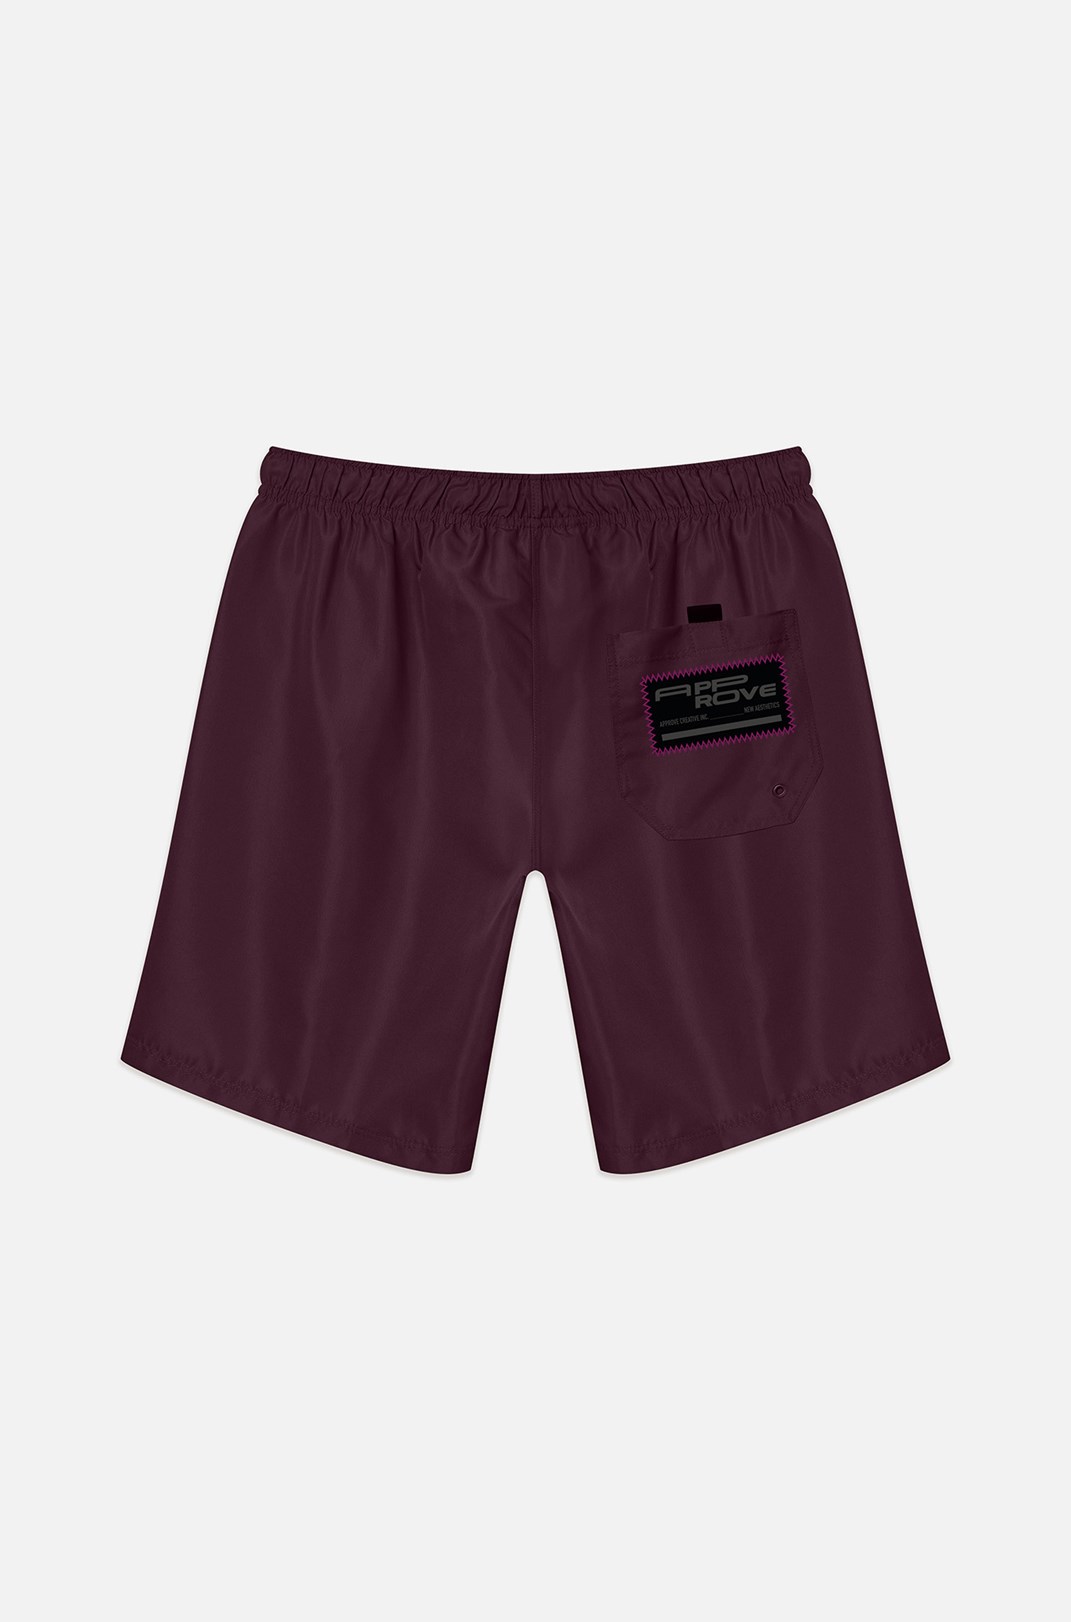 Shorts 7inches Approve New Asthetic Roxo